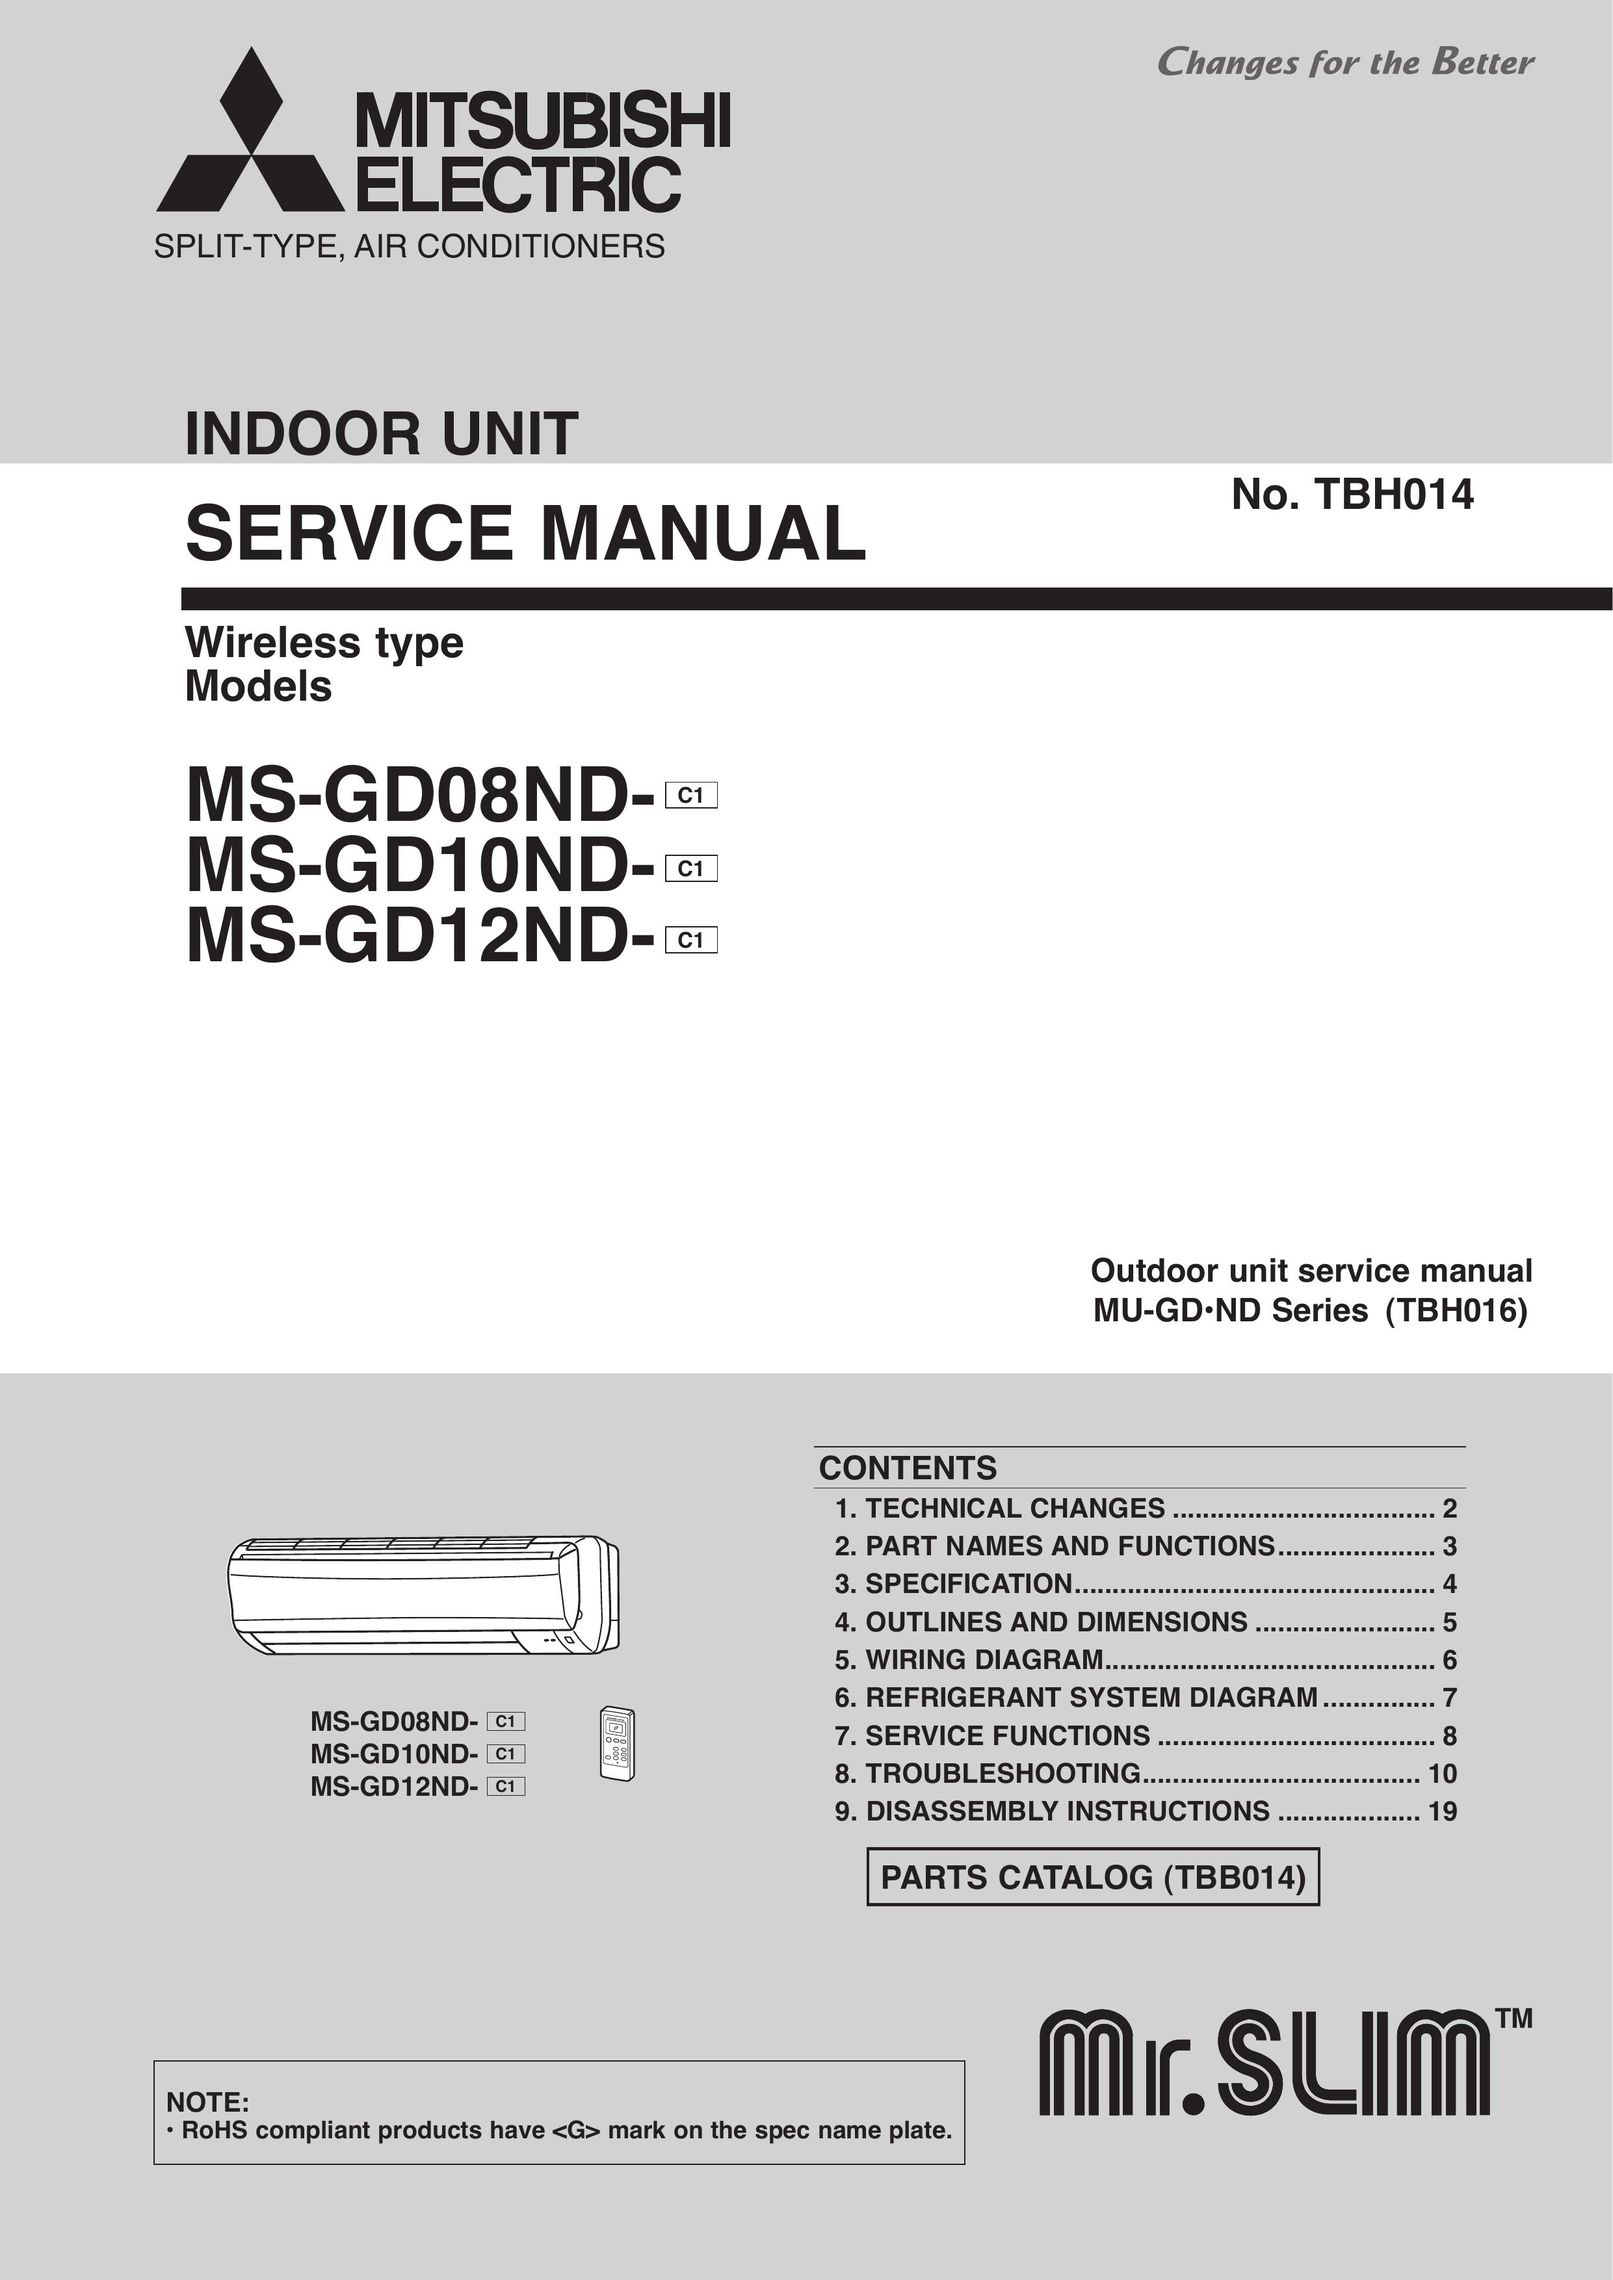 Mitsumi electronic MS-GD12ND Air Conditioner User Manual